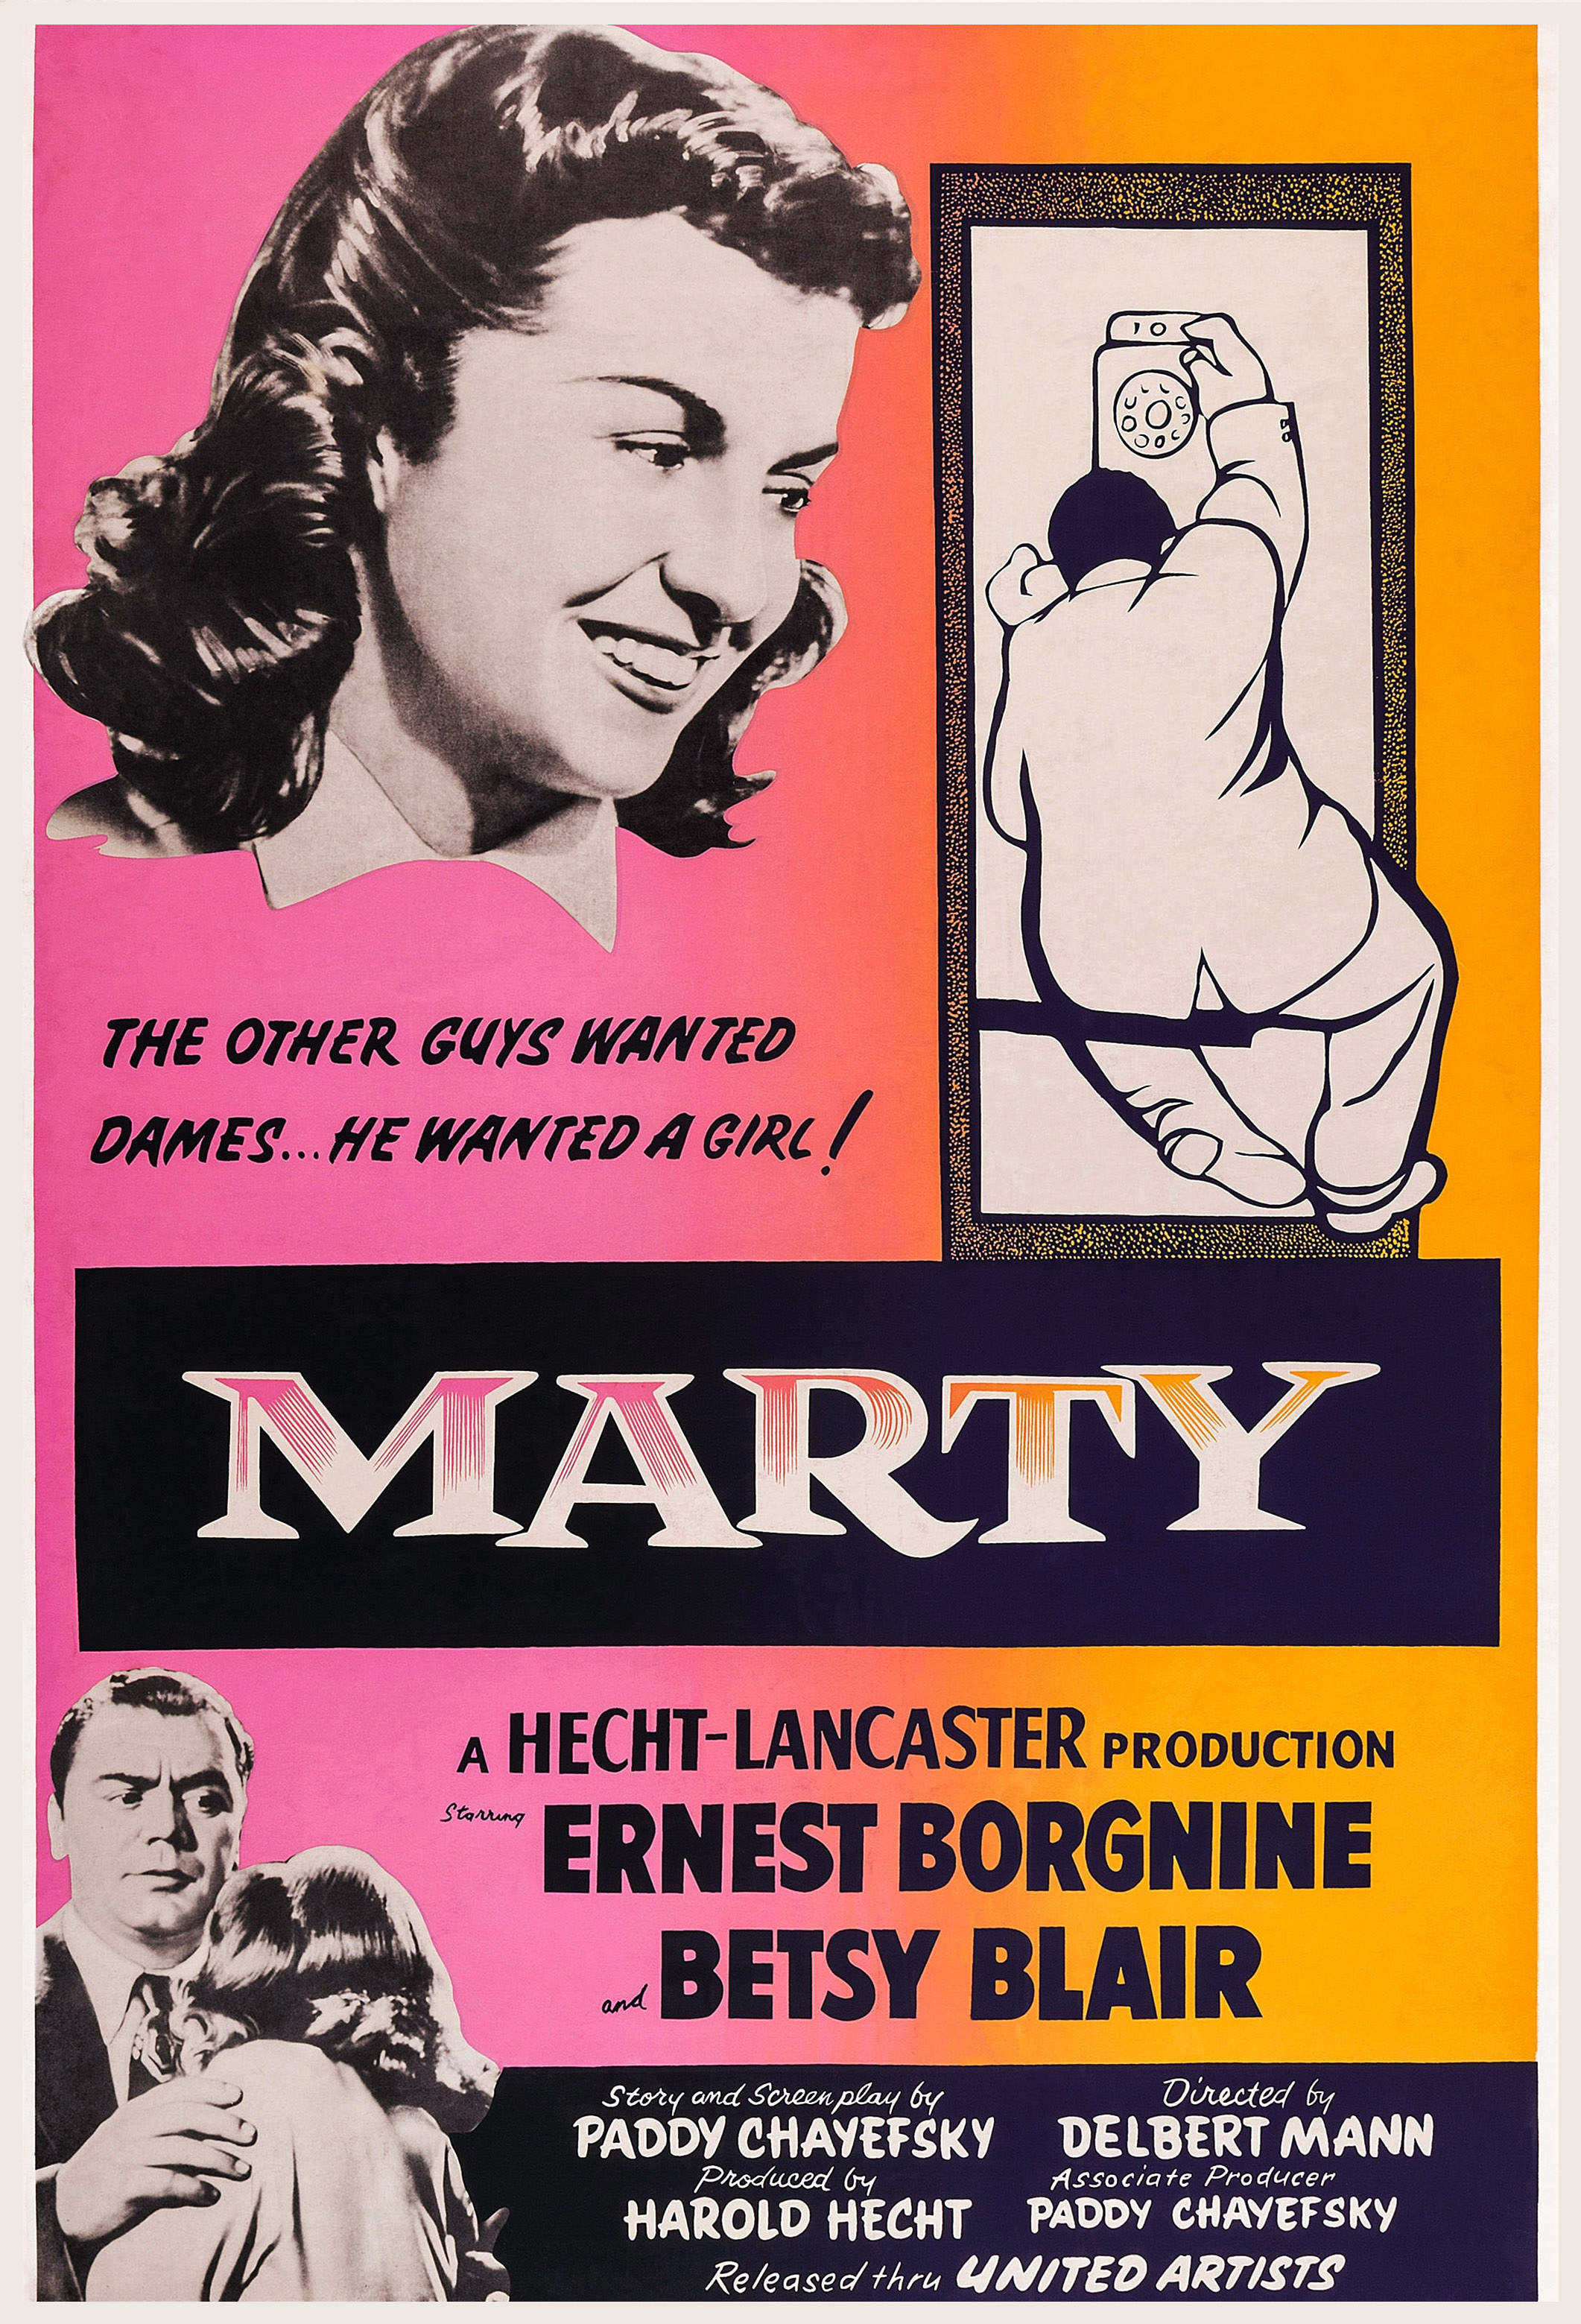 The poster for Marty